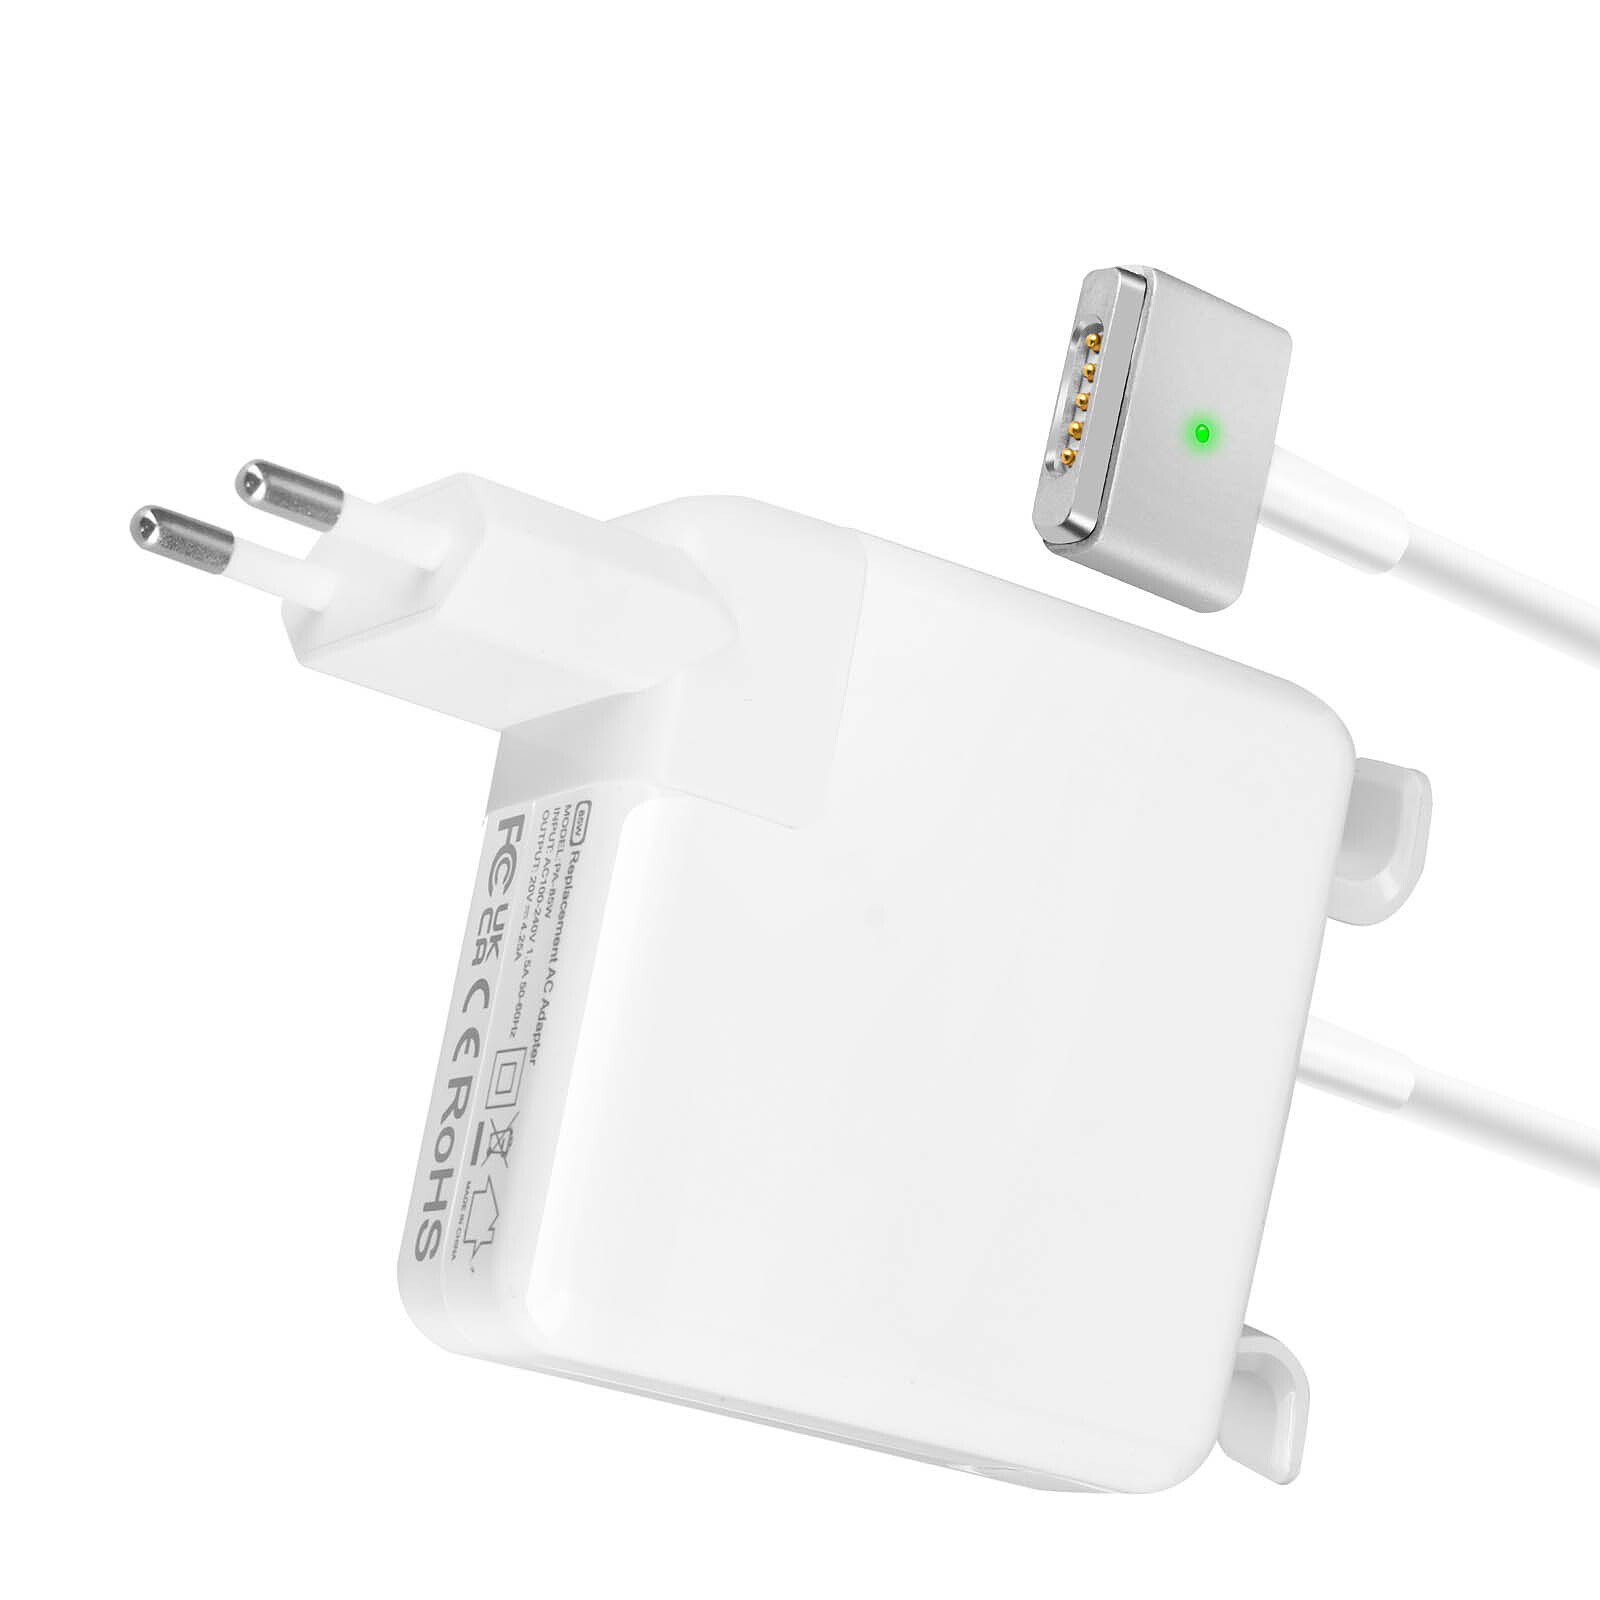 Avizar Chargeur Macbook Magsafe 2 Magnétique Charge Rapide 45W